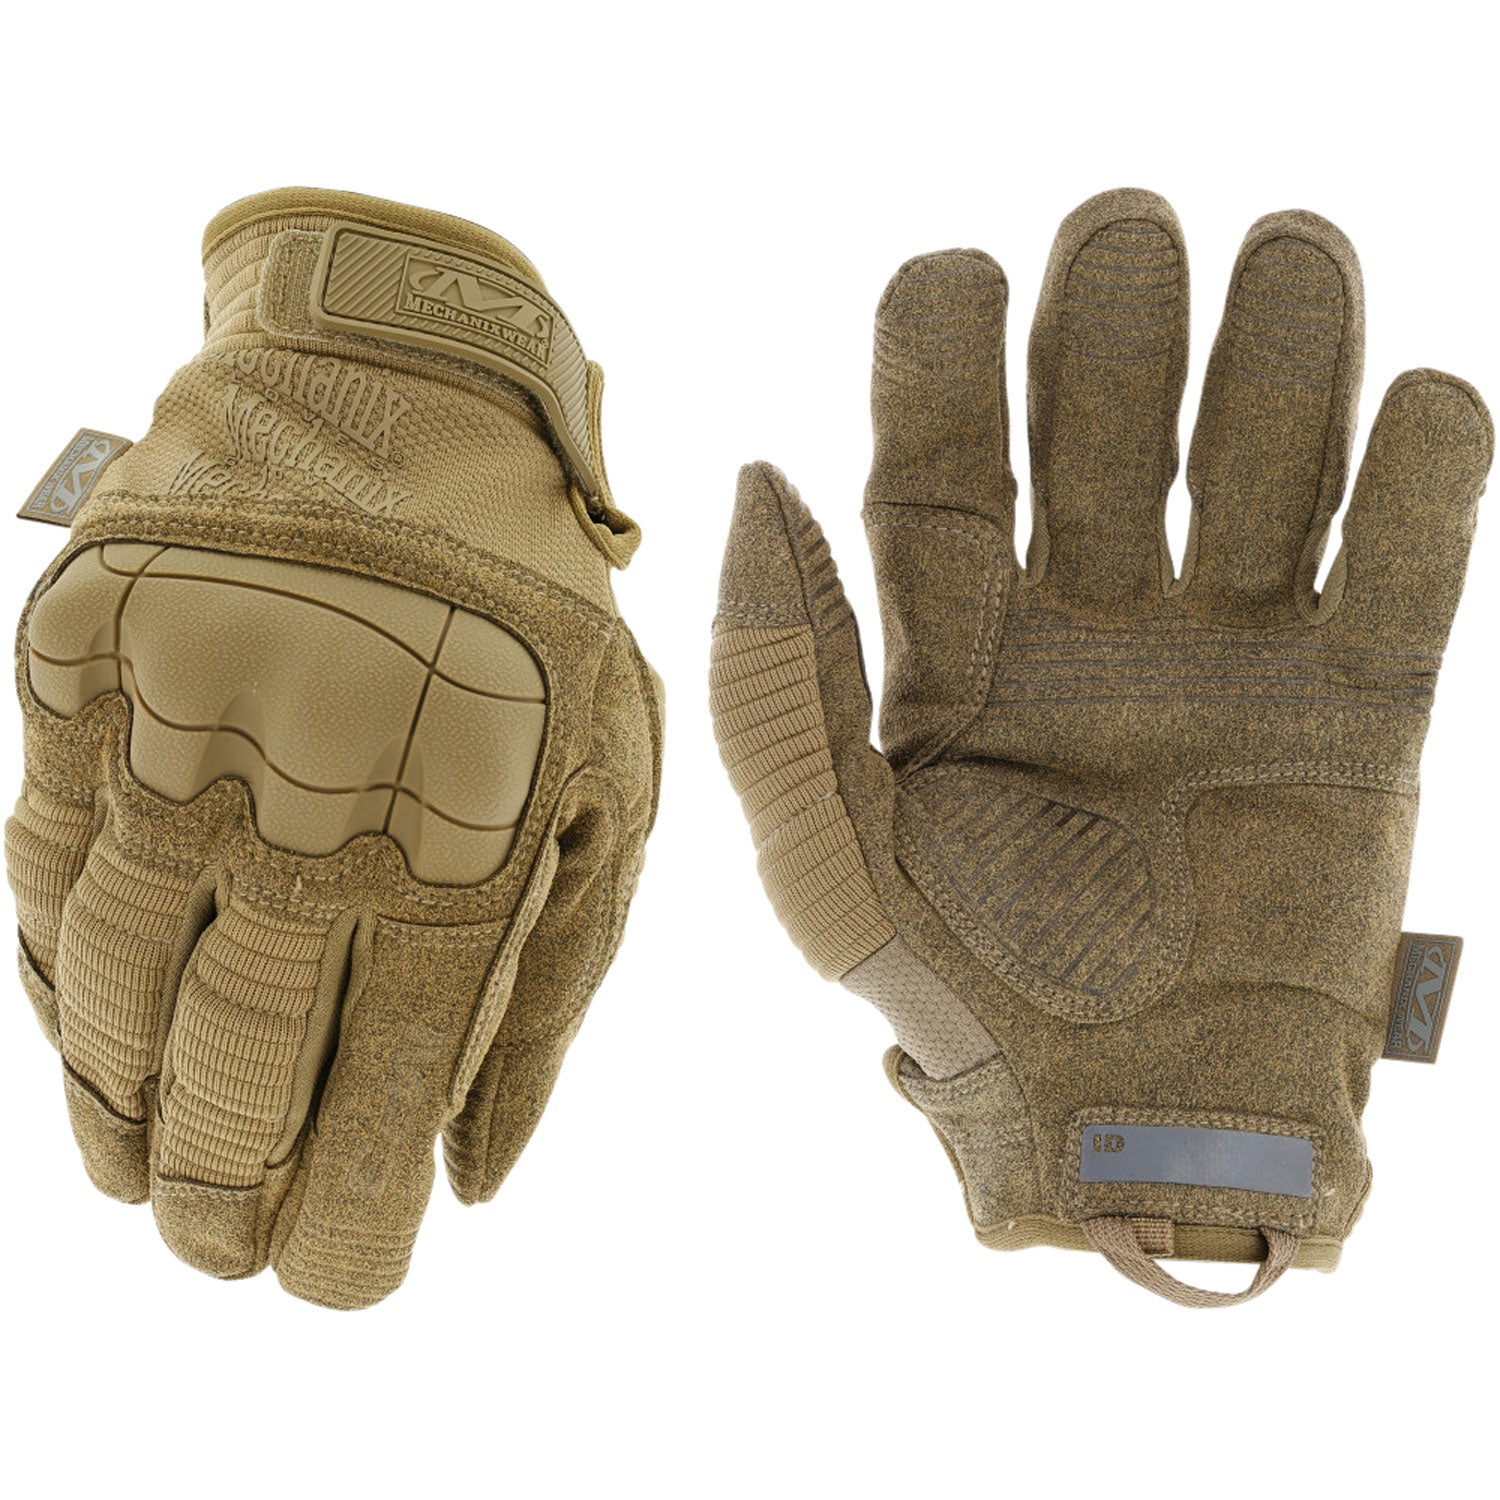 MECHANIX WEAR MP3-72-009 M-Pact 3 Medium Coyote Synthetic Leather